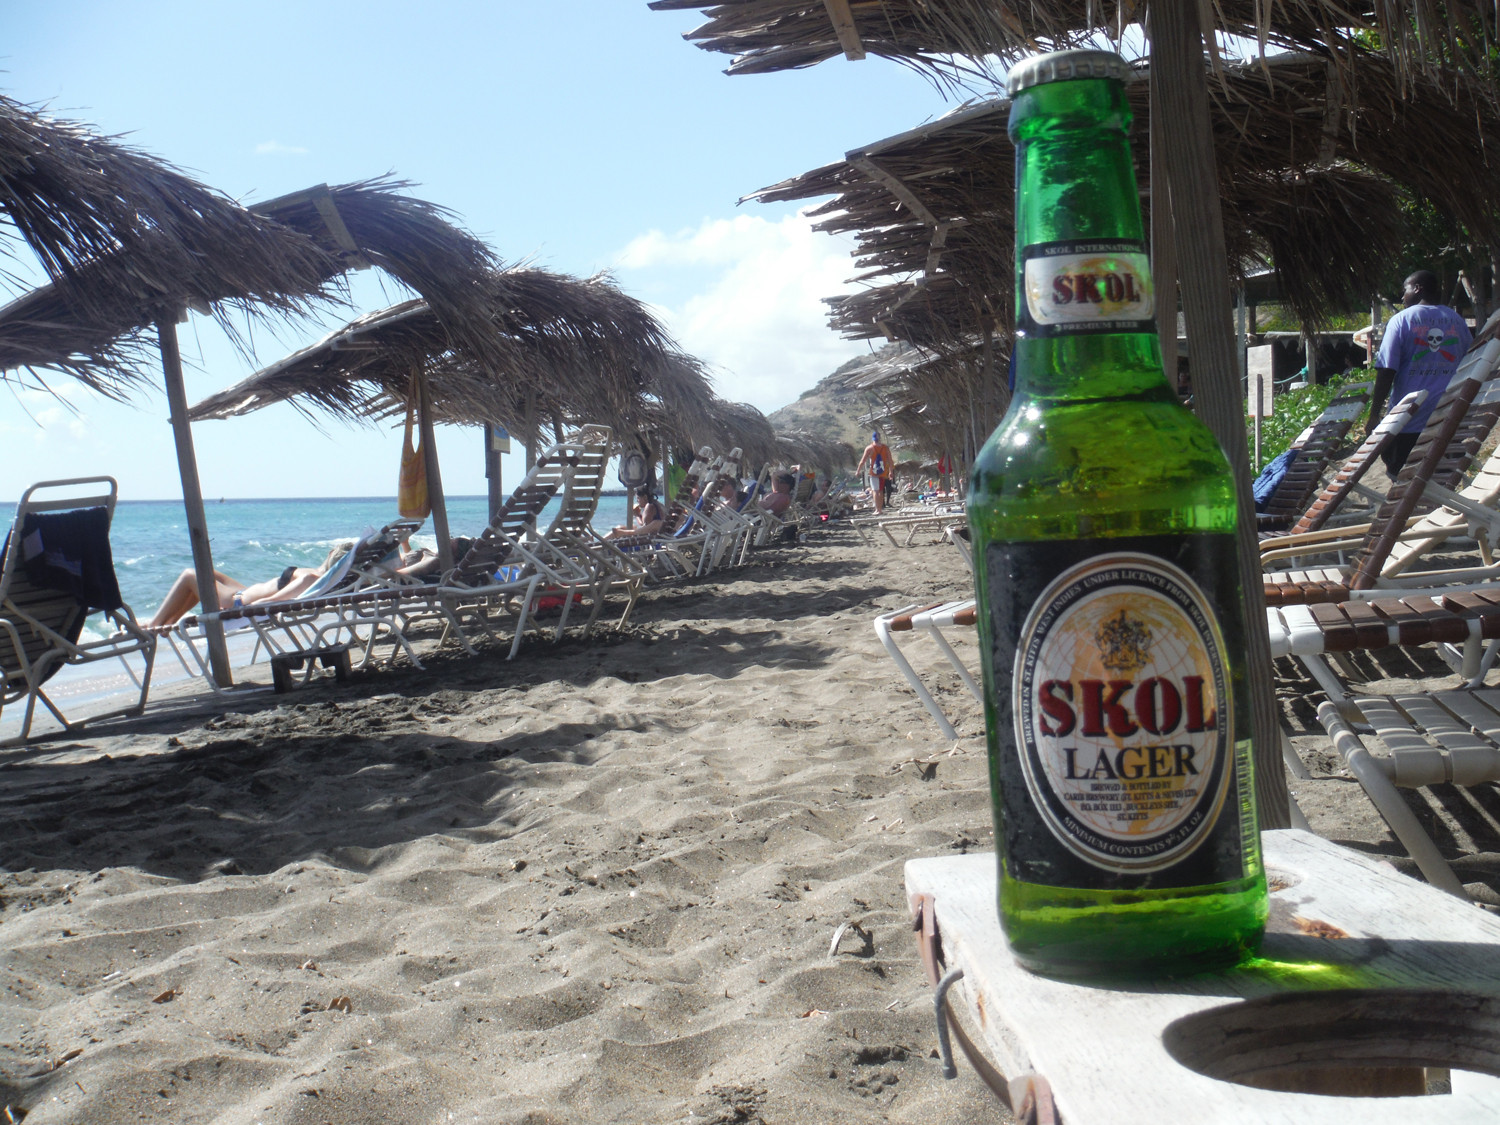 Find Skol Caribbean island beer on St. Kitts and Nevis beaches.